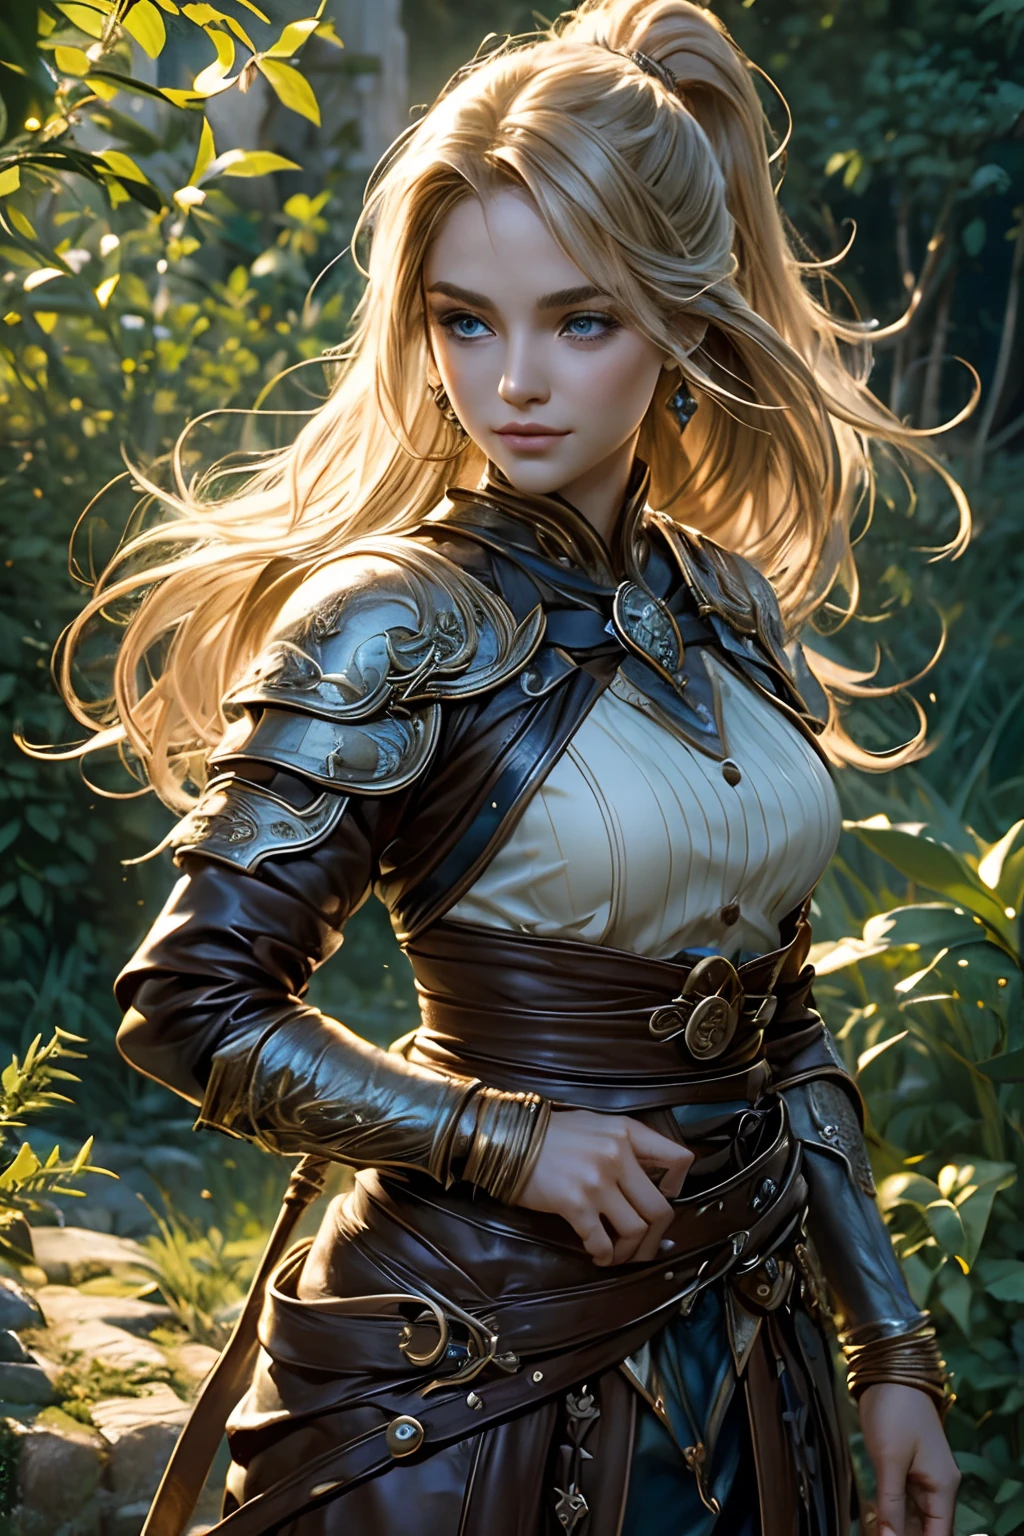 "(Best Quality,hight resolution,Masterpiece:1.2),beautiful detailed blue eyes,Stunning blonde with long hair, tail, Hair gathered in a ponytail,Girl with a charming smile, Clothes made of tanned leather, briefs, leather armour, soft natural lighting,Flower garden background,bright colours,Fine Brush Stroke Technique,Accentuate the girl's joyful expression,A gentle breeze gently rustles her hair,Meticulous attention to facial features and hair strands,Realistic skin tones and textures, A keen eye, Battle Maiden, Figure Warfare, athletic build, musculature, long leges, Long Range